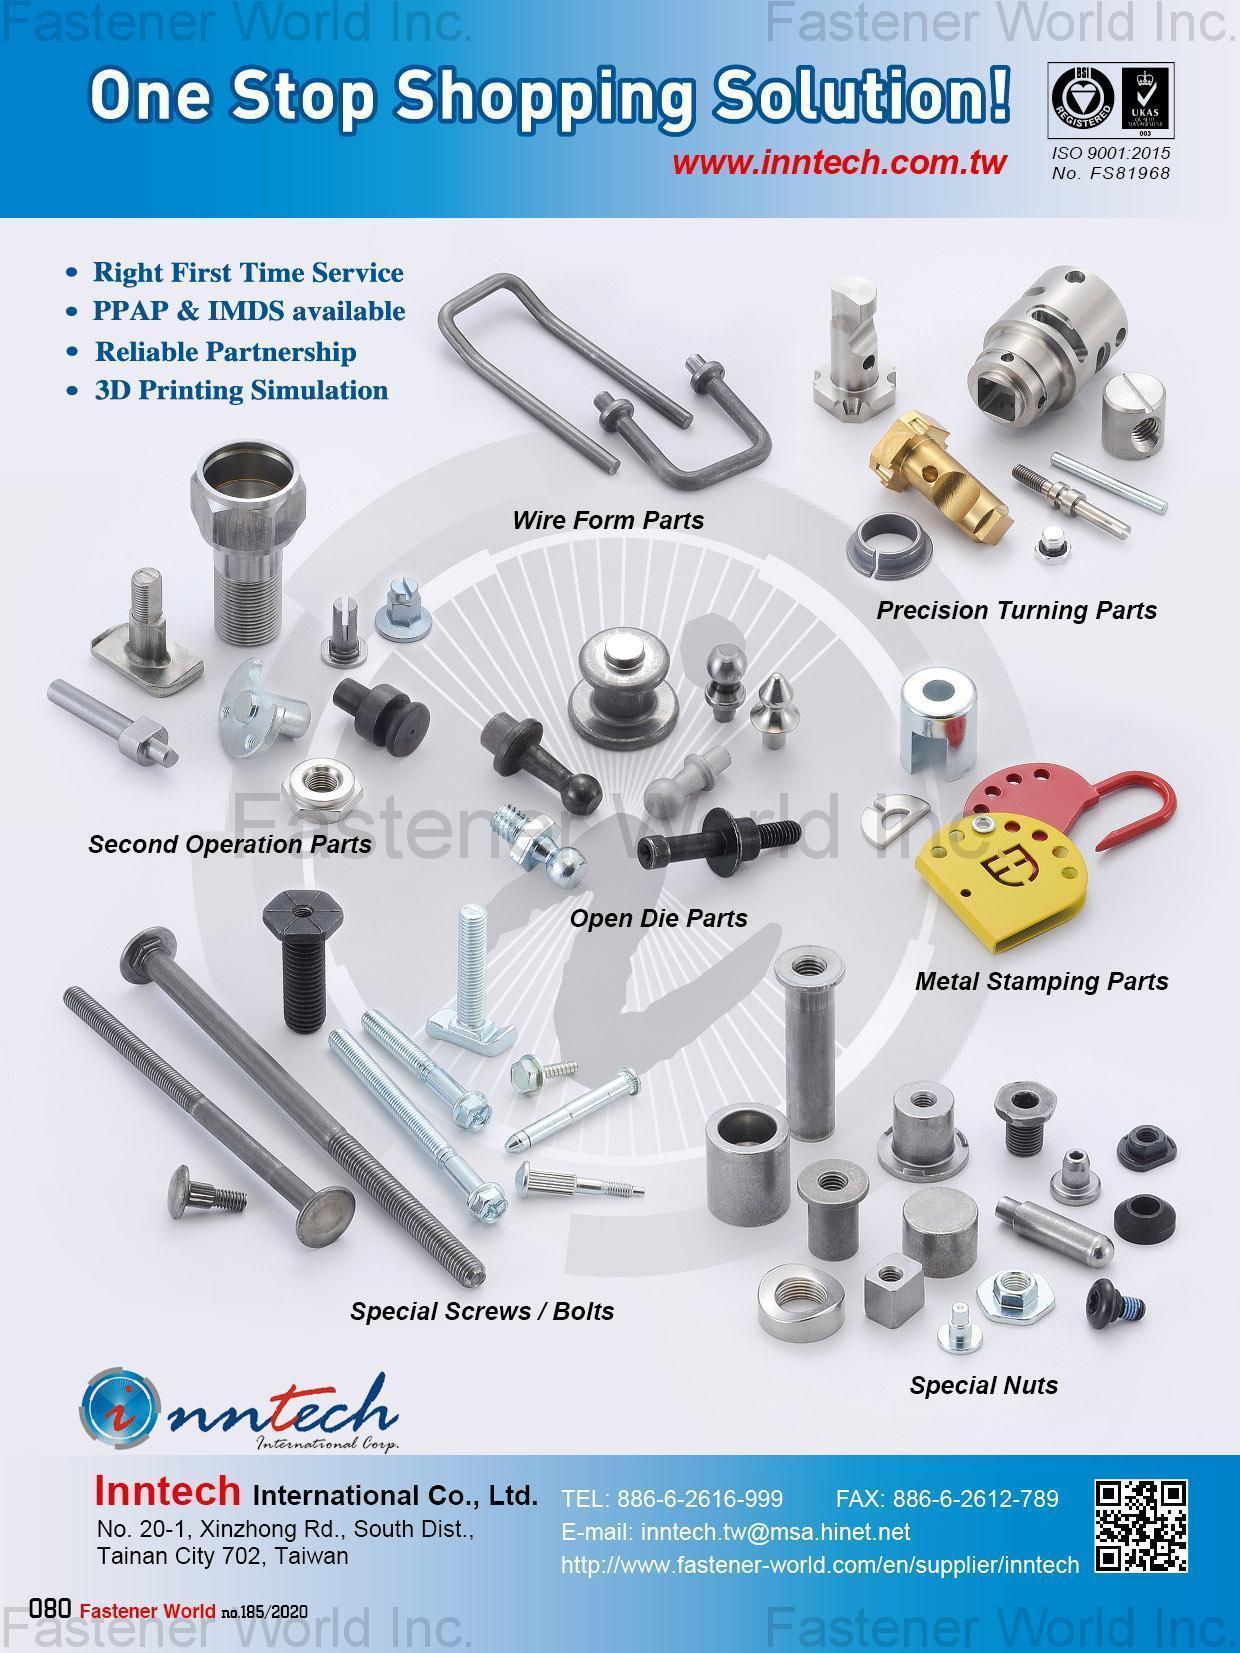 INNTECH INTERNATIONAL CO., LTD.  , Wire Form Parts, Second Operation Parts, Open Die Parts, Precision Turning Parts, Metal Stamping Parts, Special Screws / Bolts, Special Nuts 